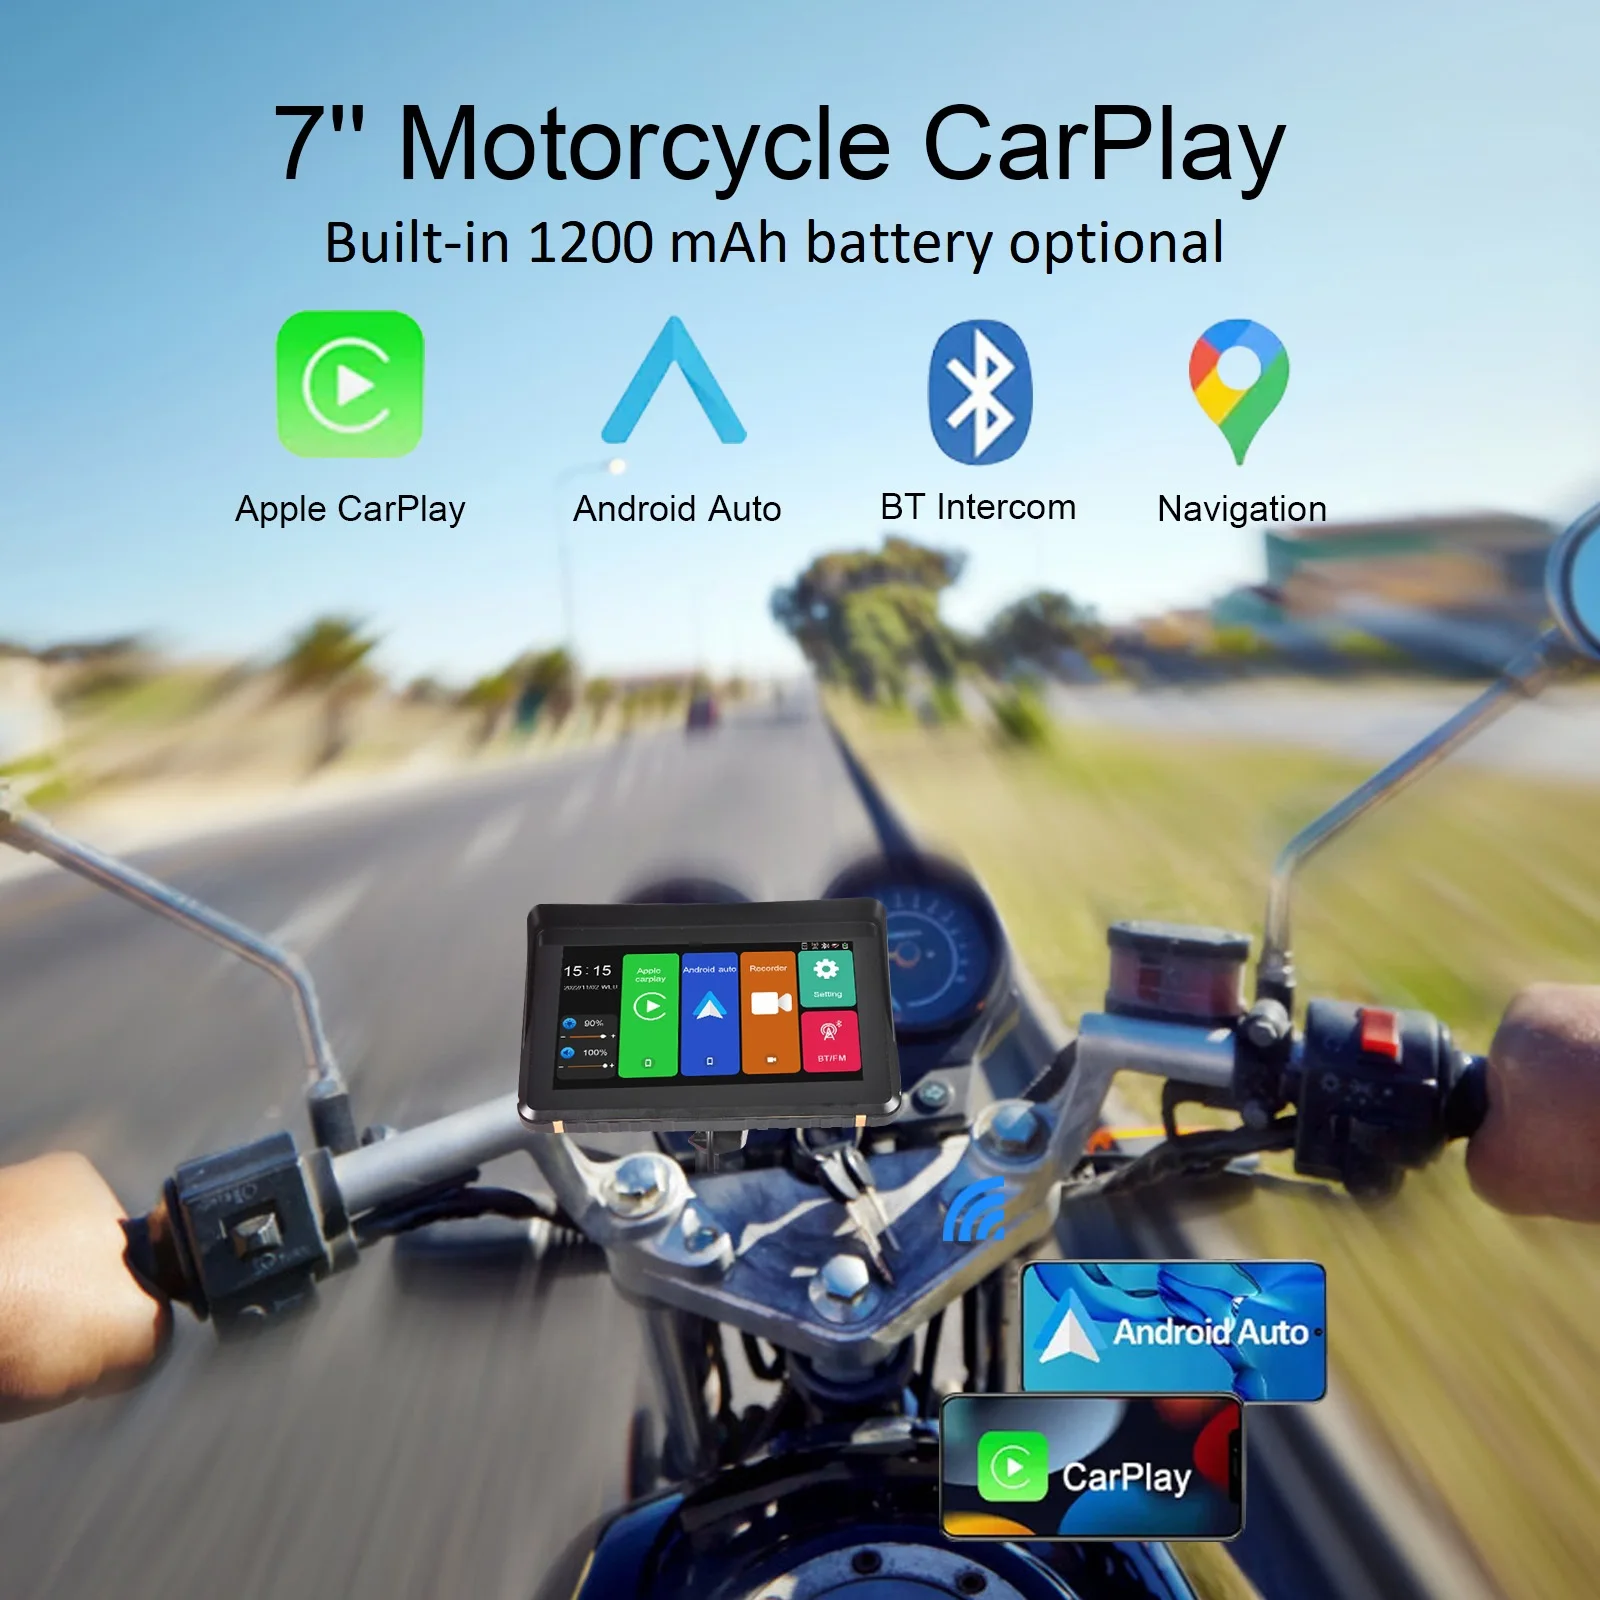 

Motorcycle Special Navigator 7 Inch Touch Screen CarPlay Monitor Wireless Apple CarPlay Android Auto IPX6 Waterproof